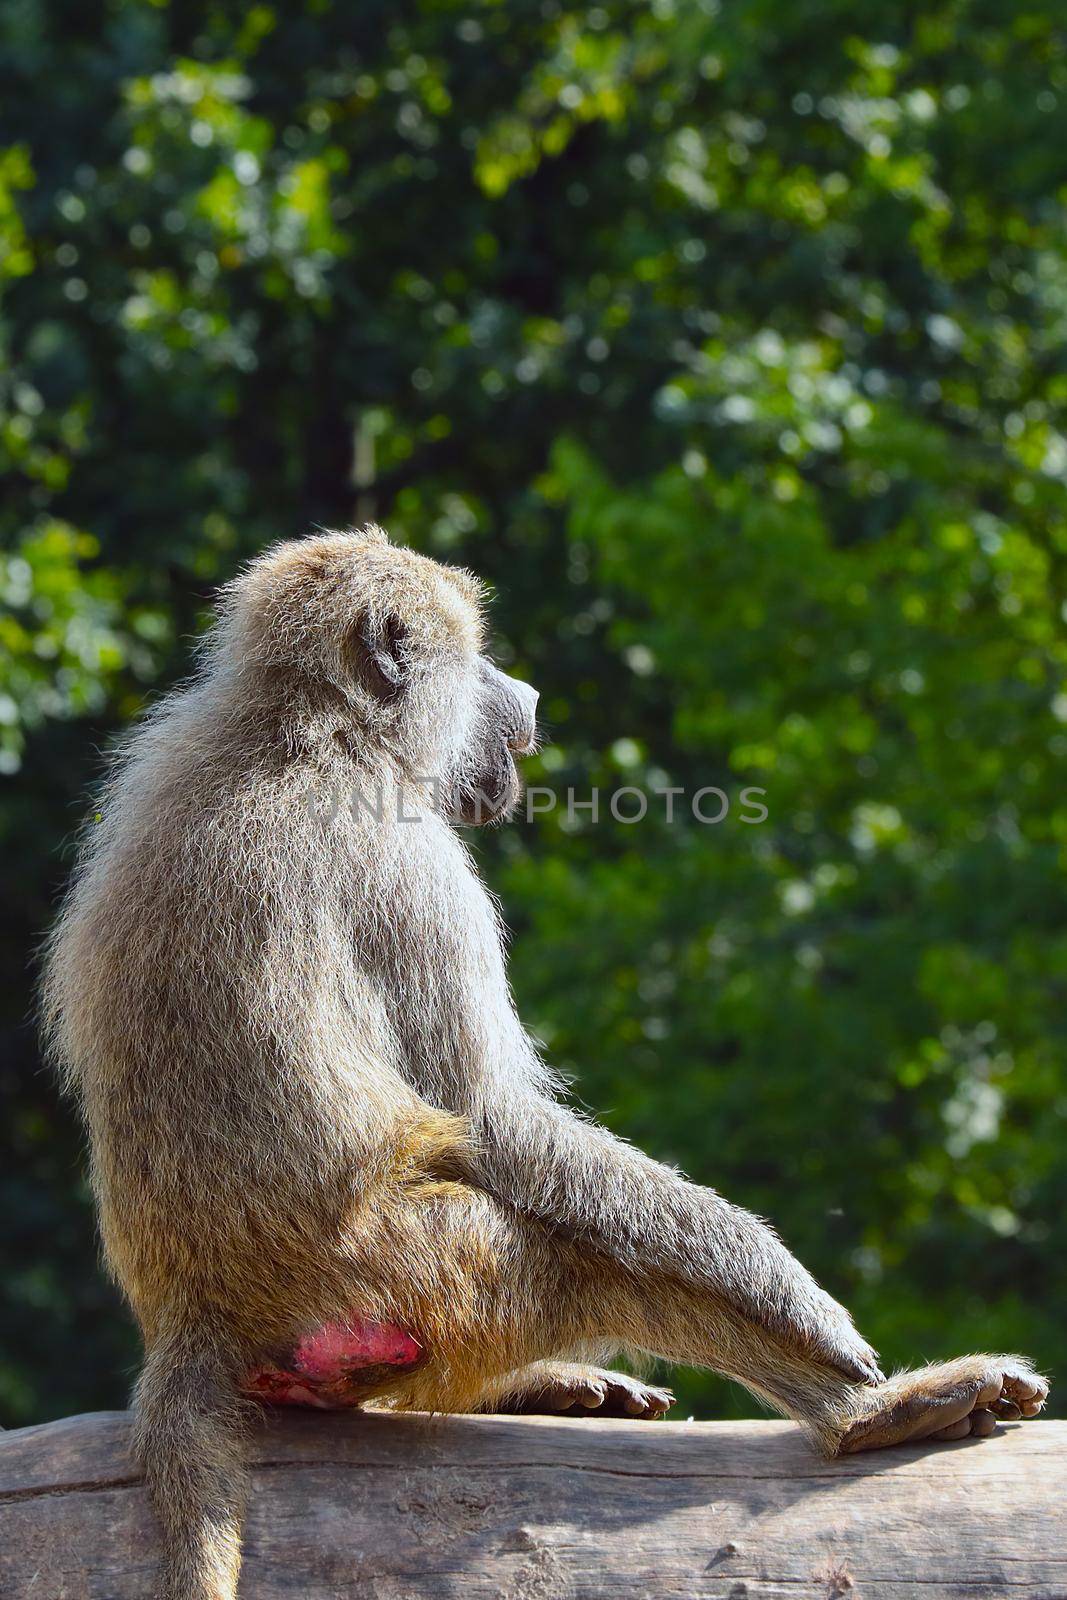 A macaque sits on a tree in the forest. by kip02kas